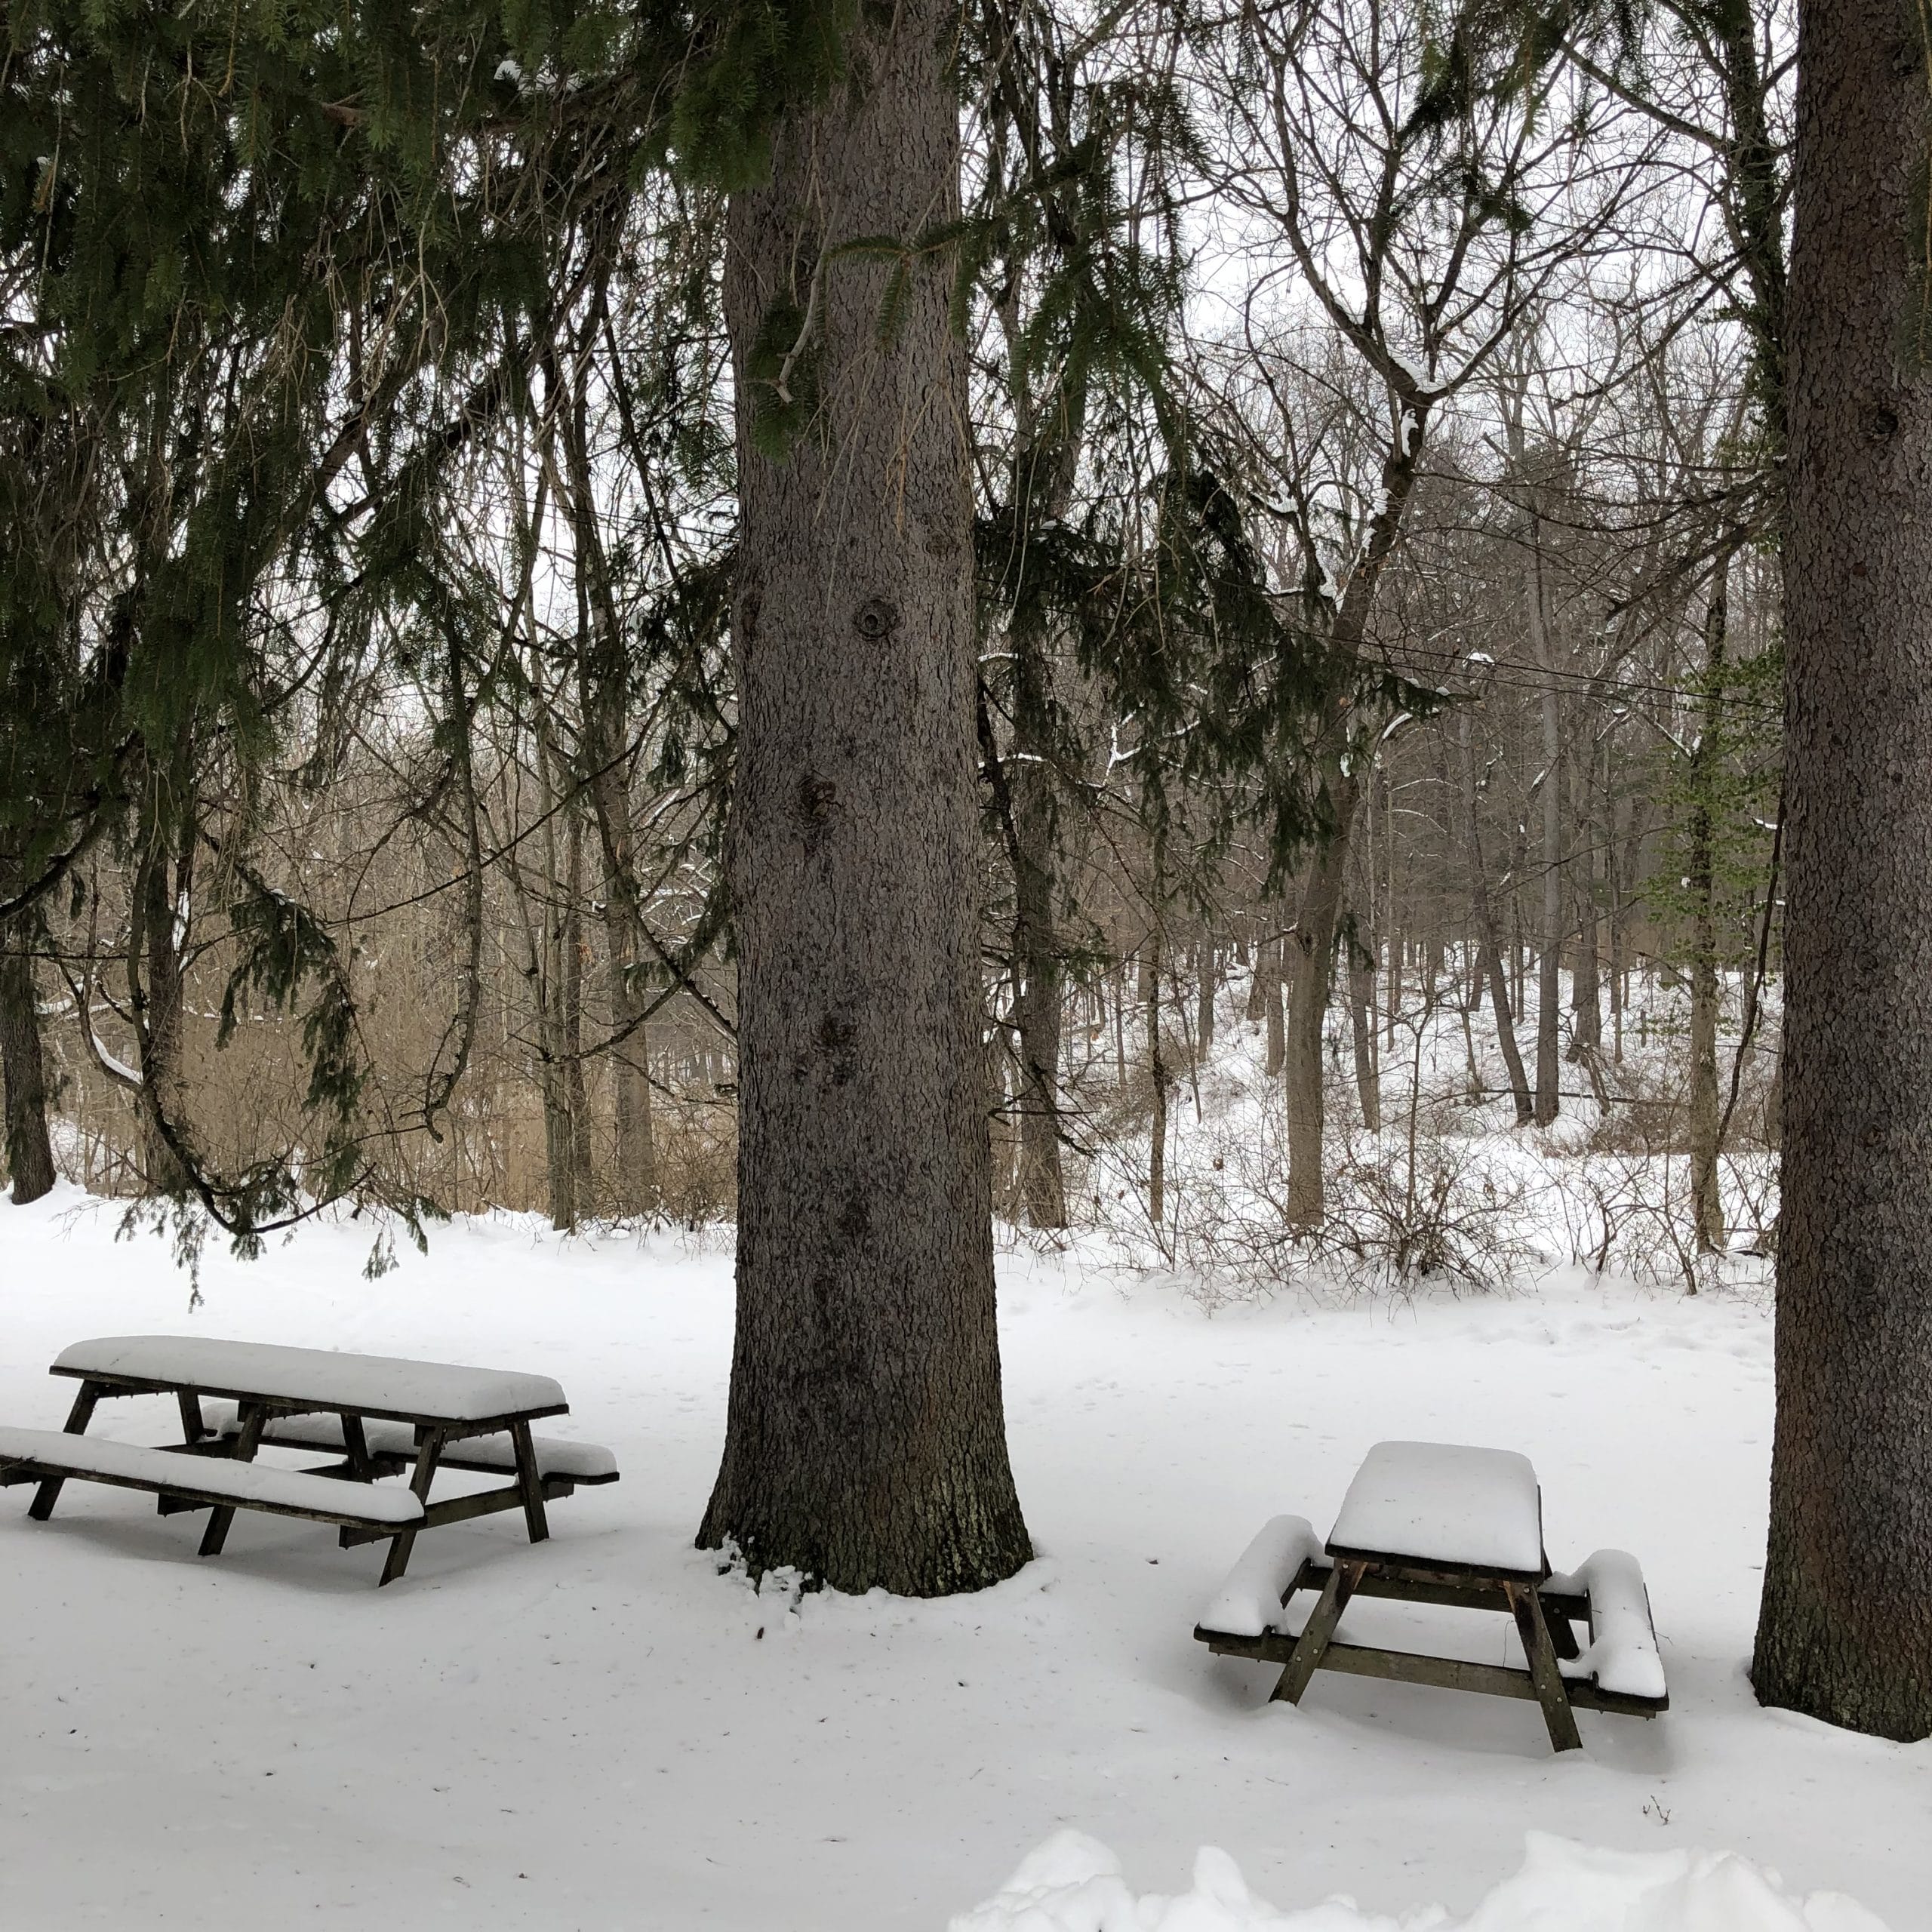 trees and picnic tables covered in snow